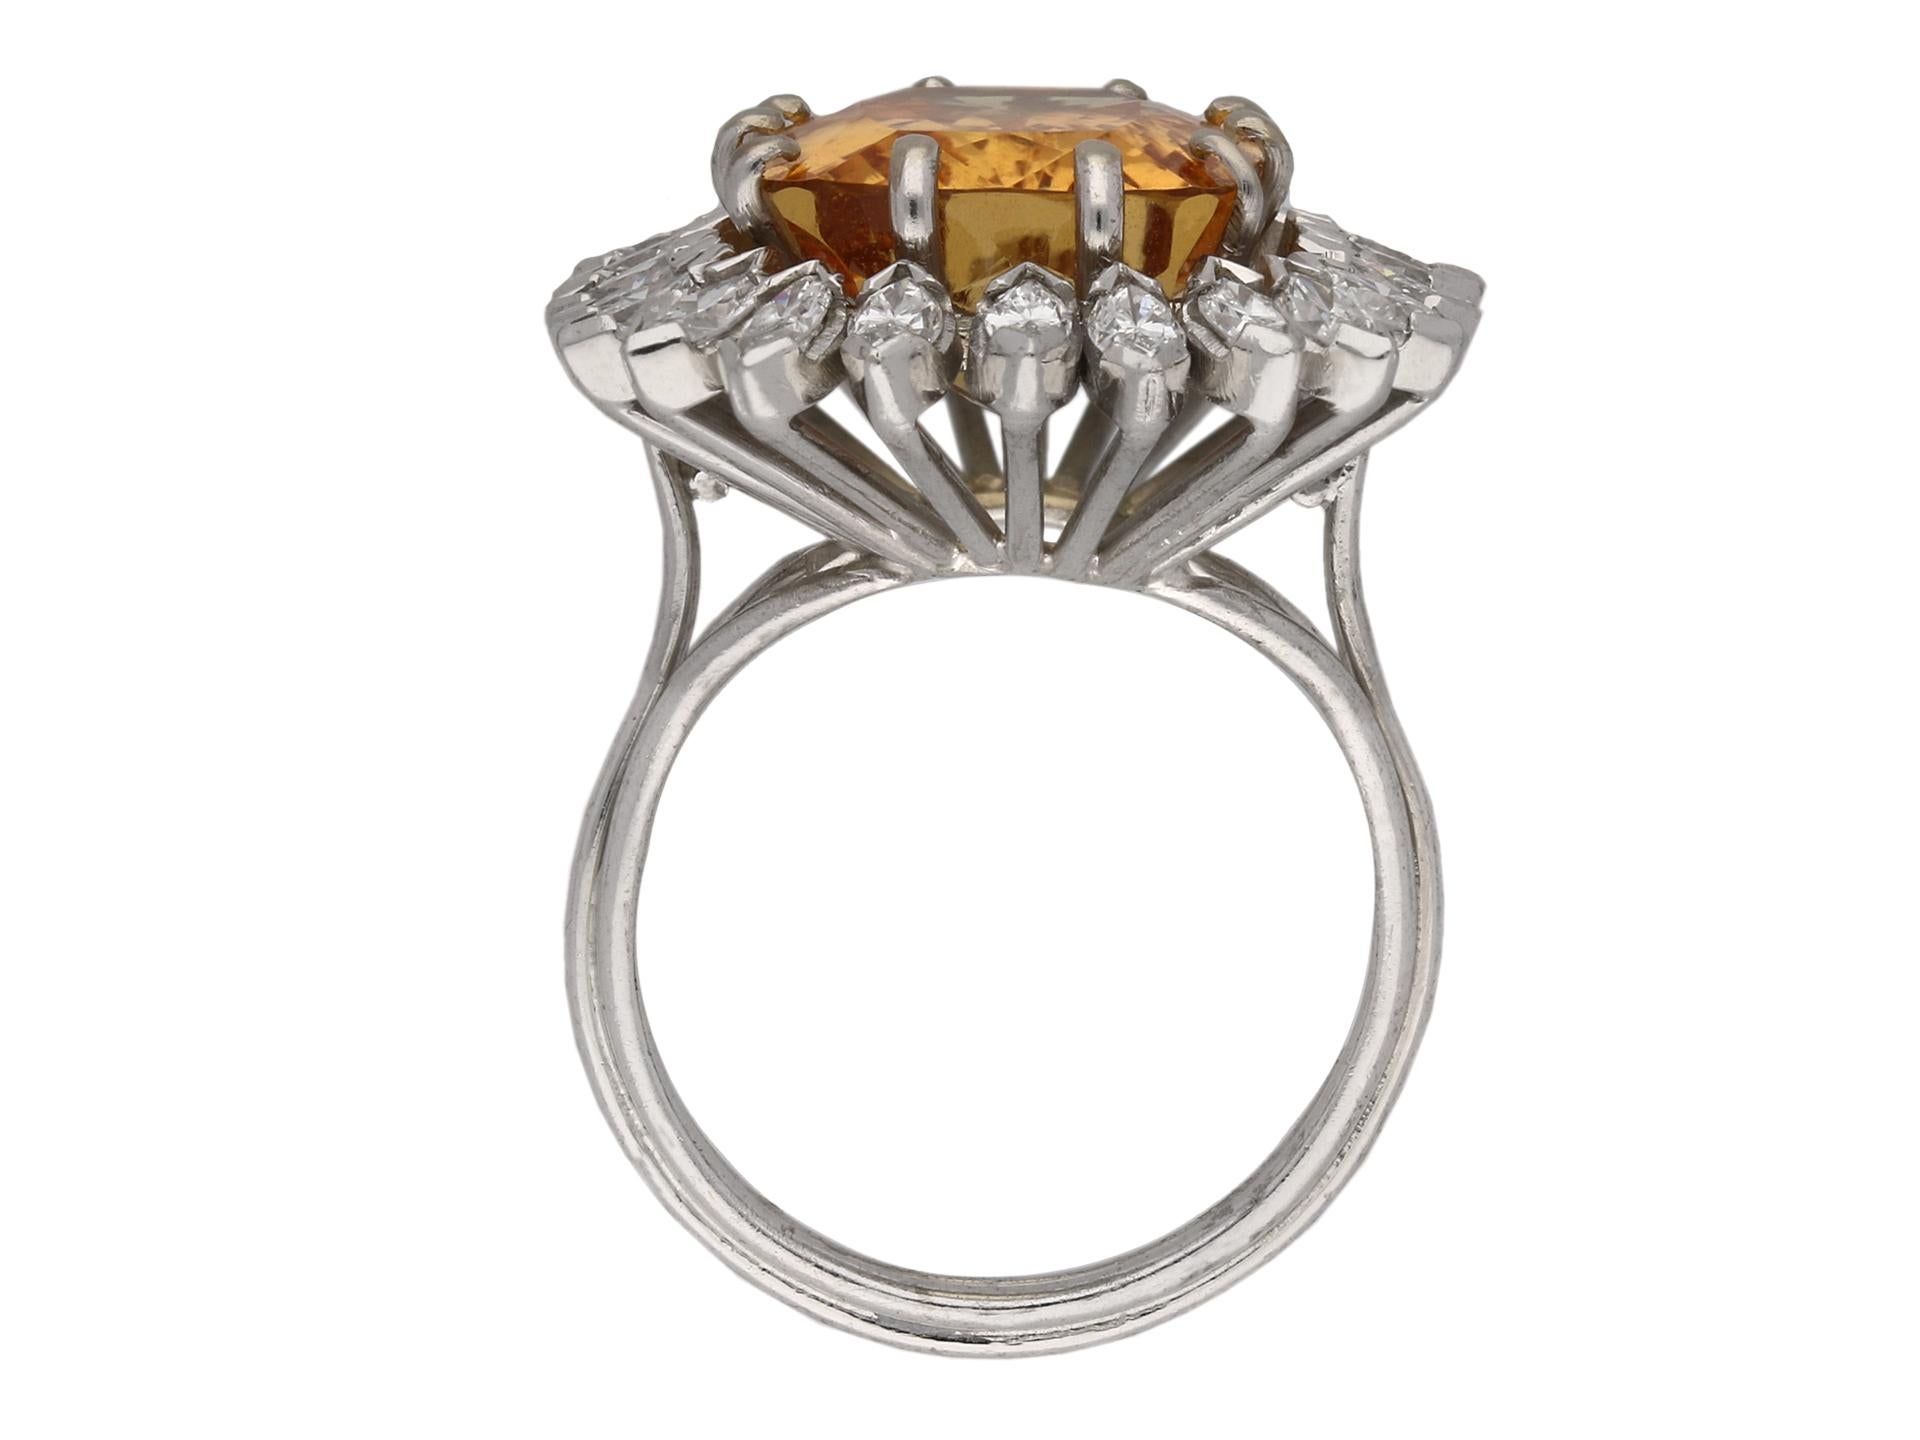 Topaz and marquise diamond coronet cluster ring. Set to the centre with a cushion shape scissor cut natural topaz in an open back claw setting with an approximate weight of 10.00 carats, encircled by a single row of twenty four outward pointed